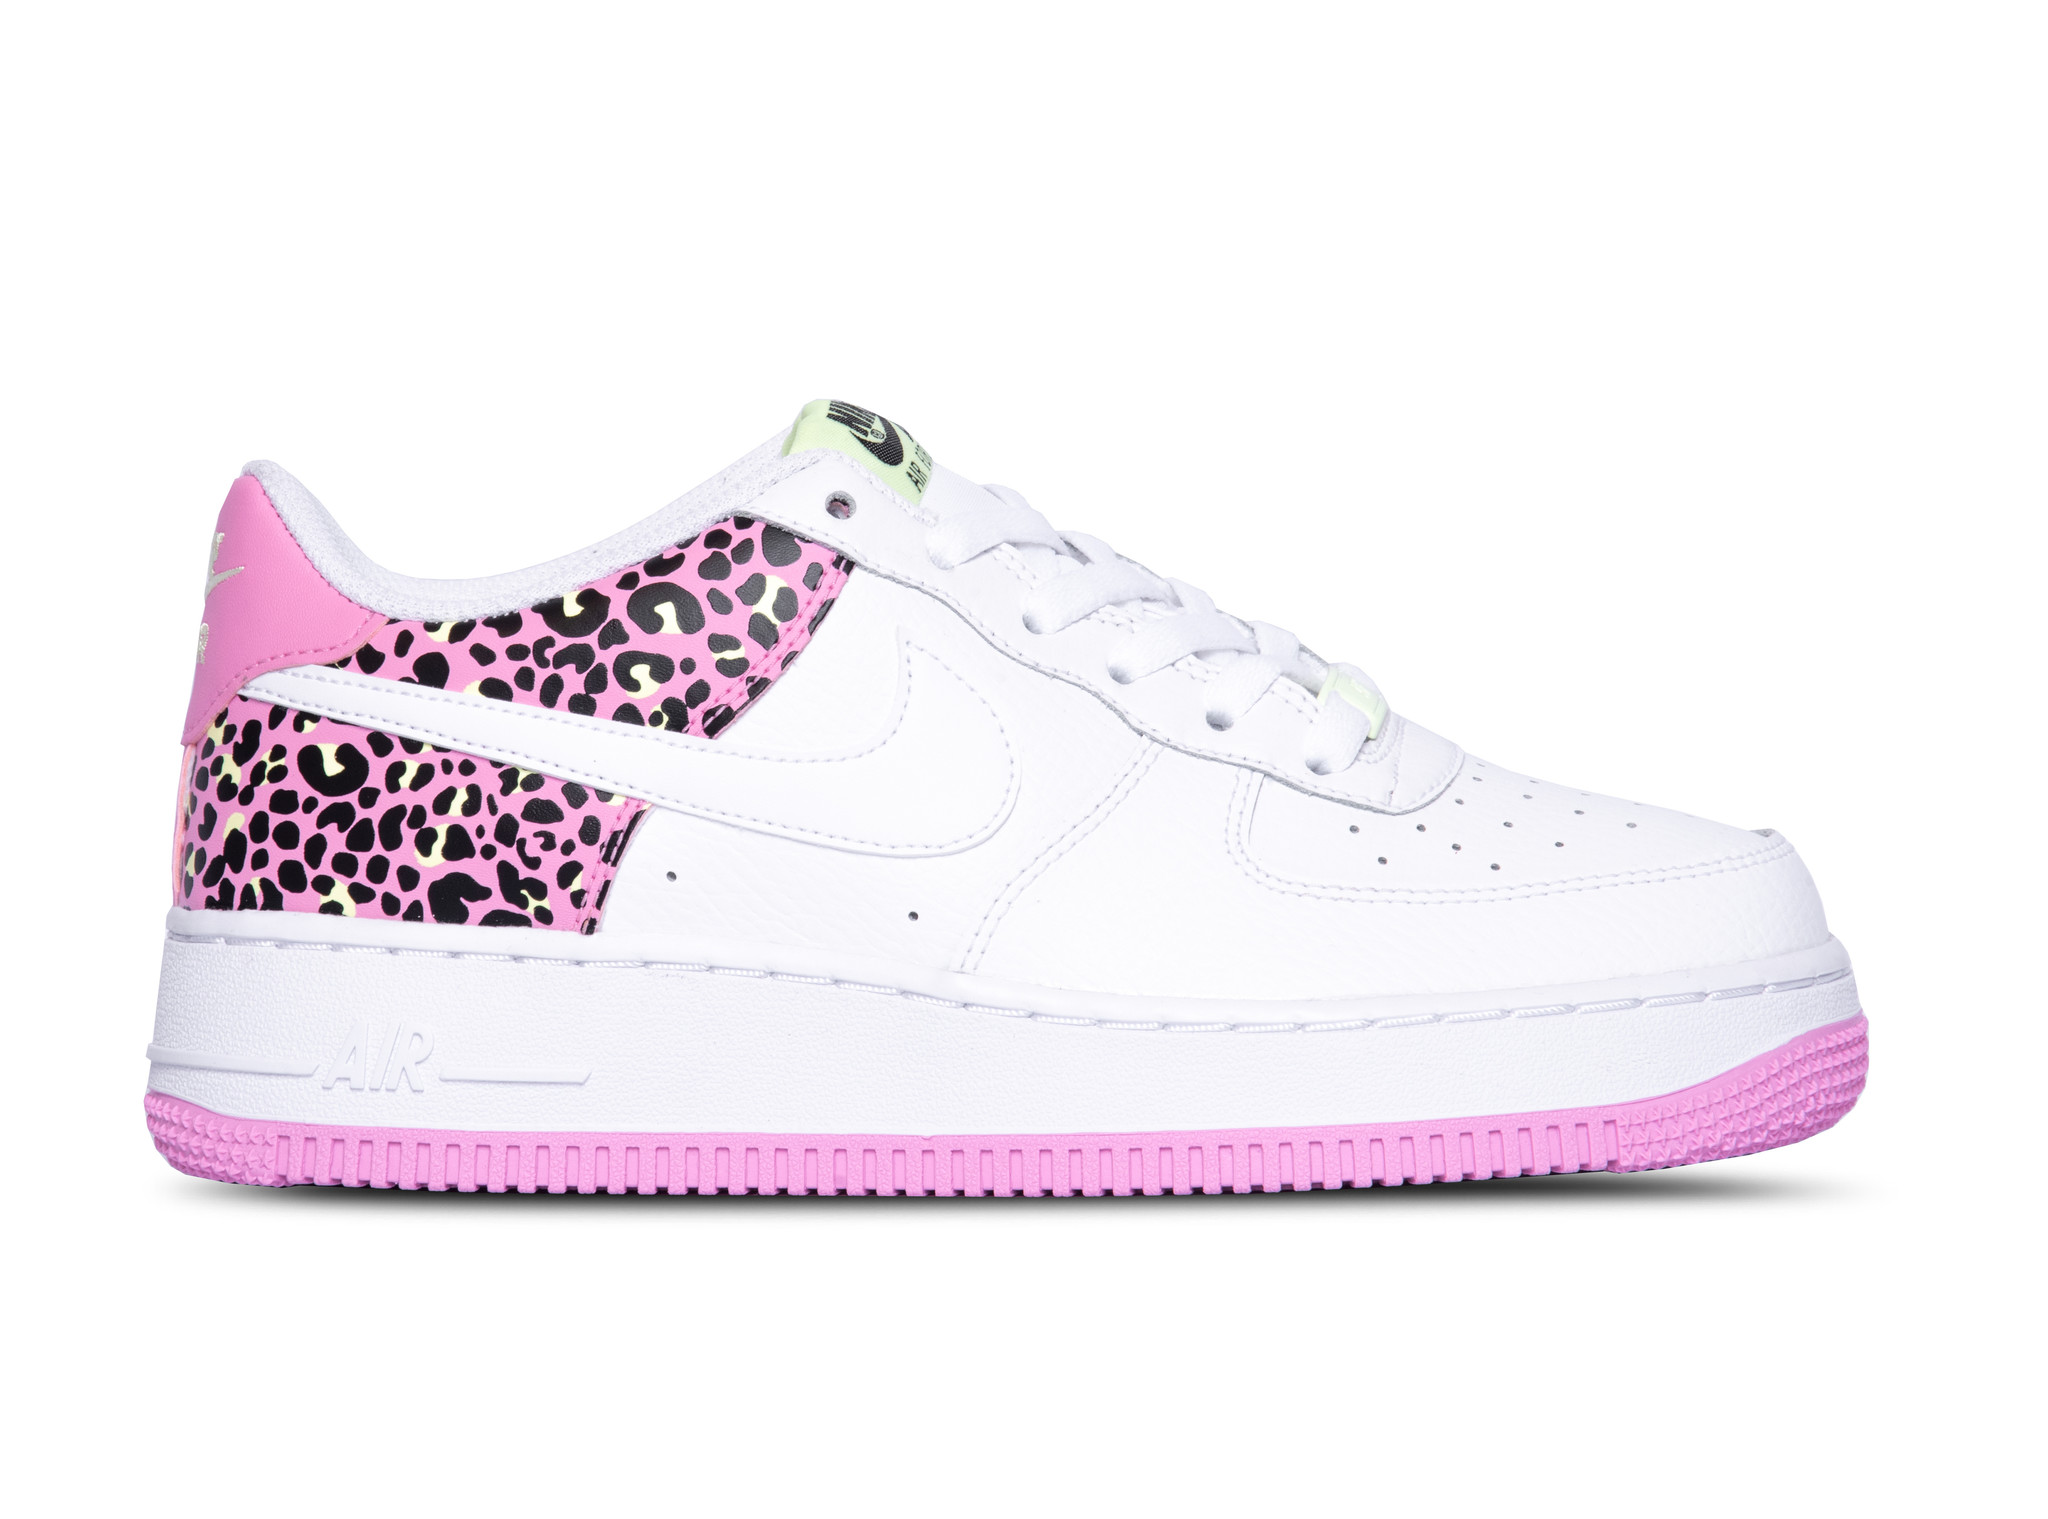 air force white and pink